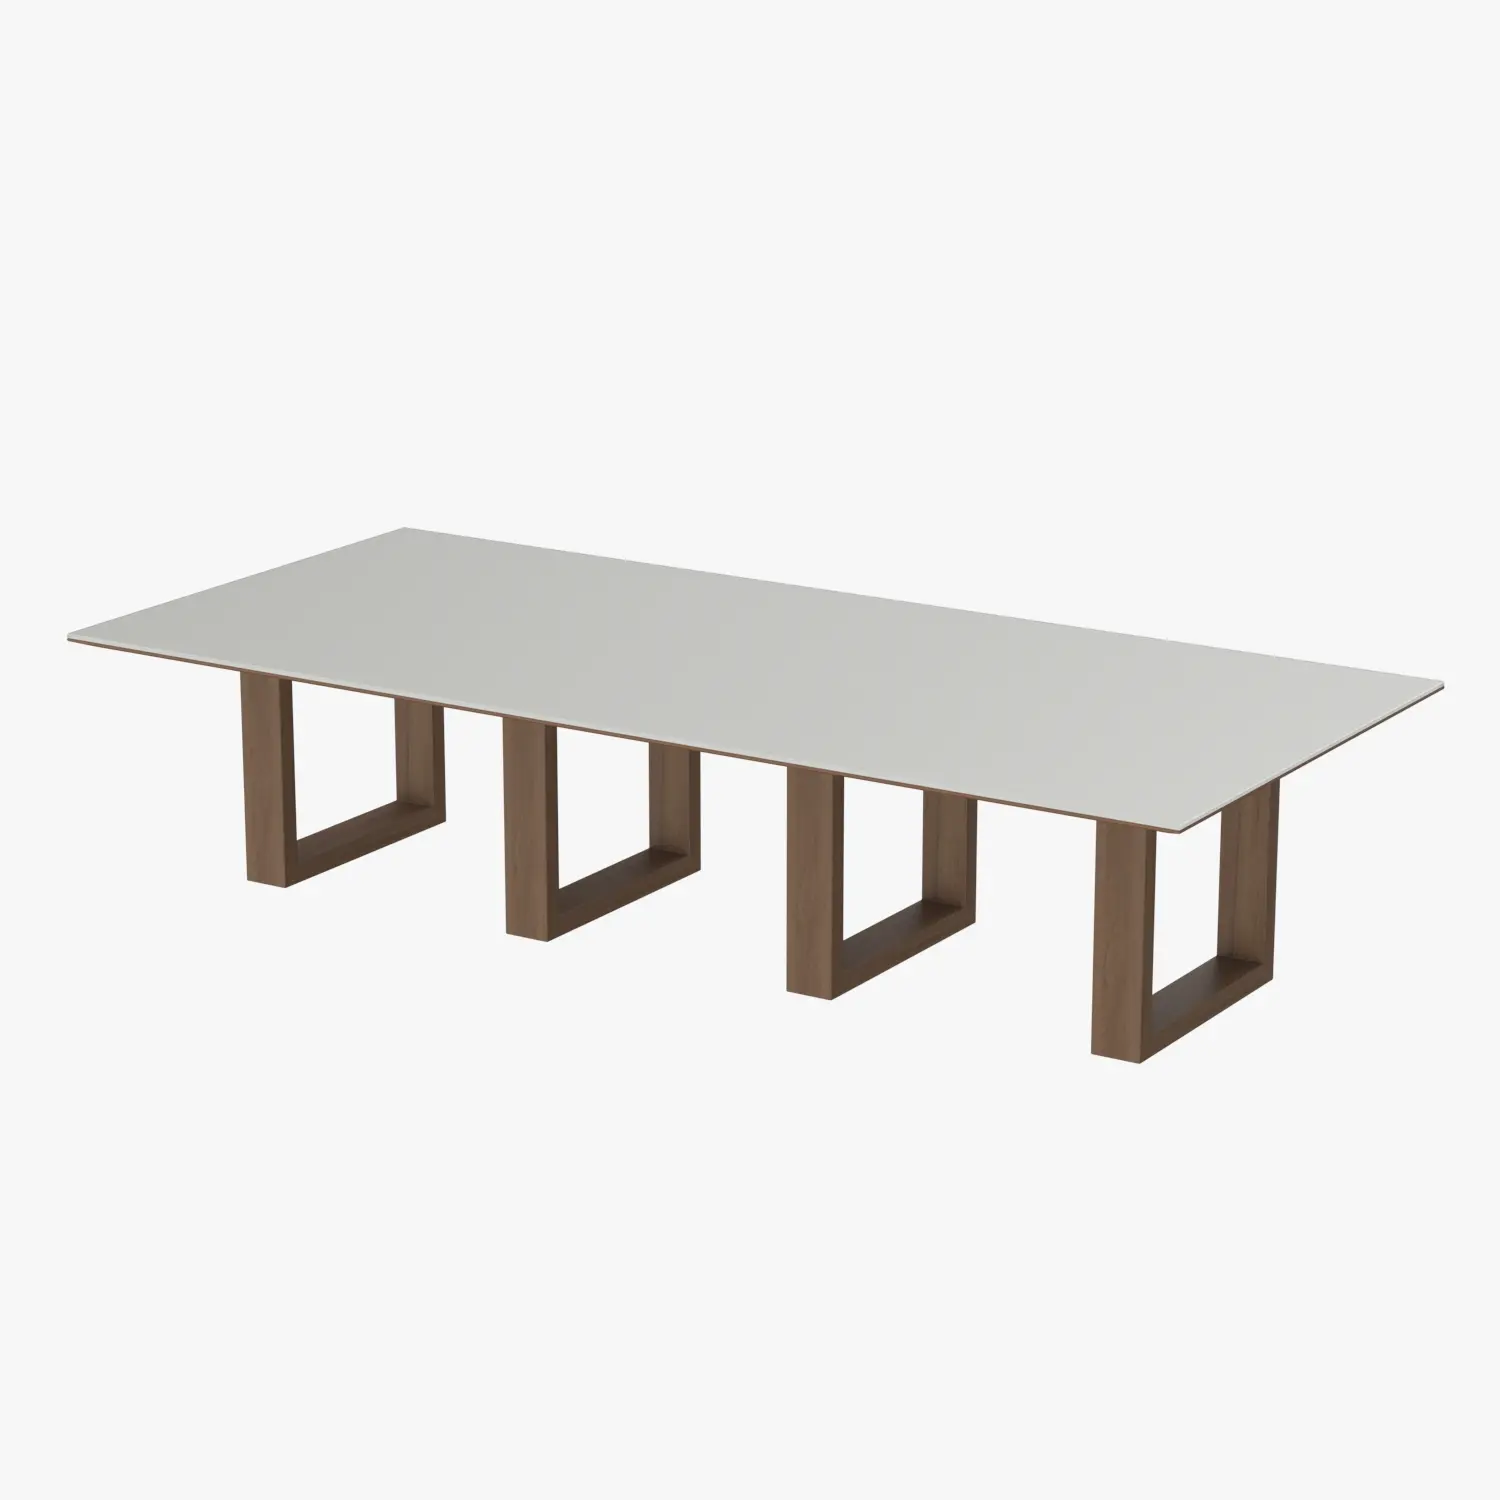 Statement Blends Natural Finishes Conference Table 3D Model_06